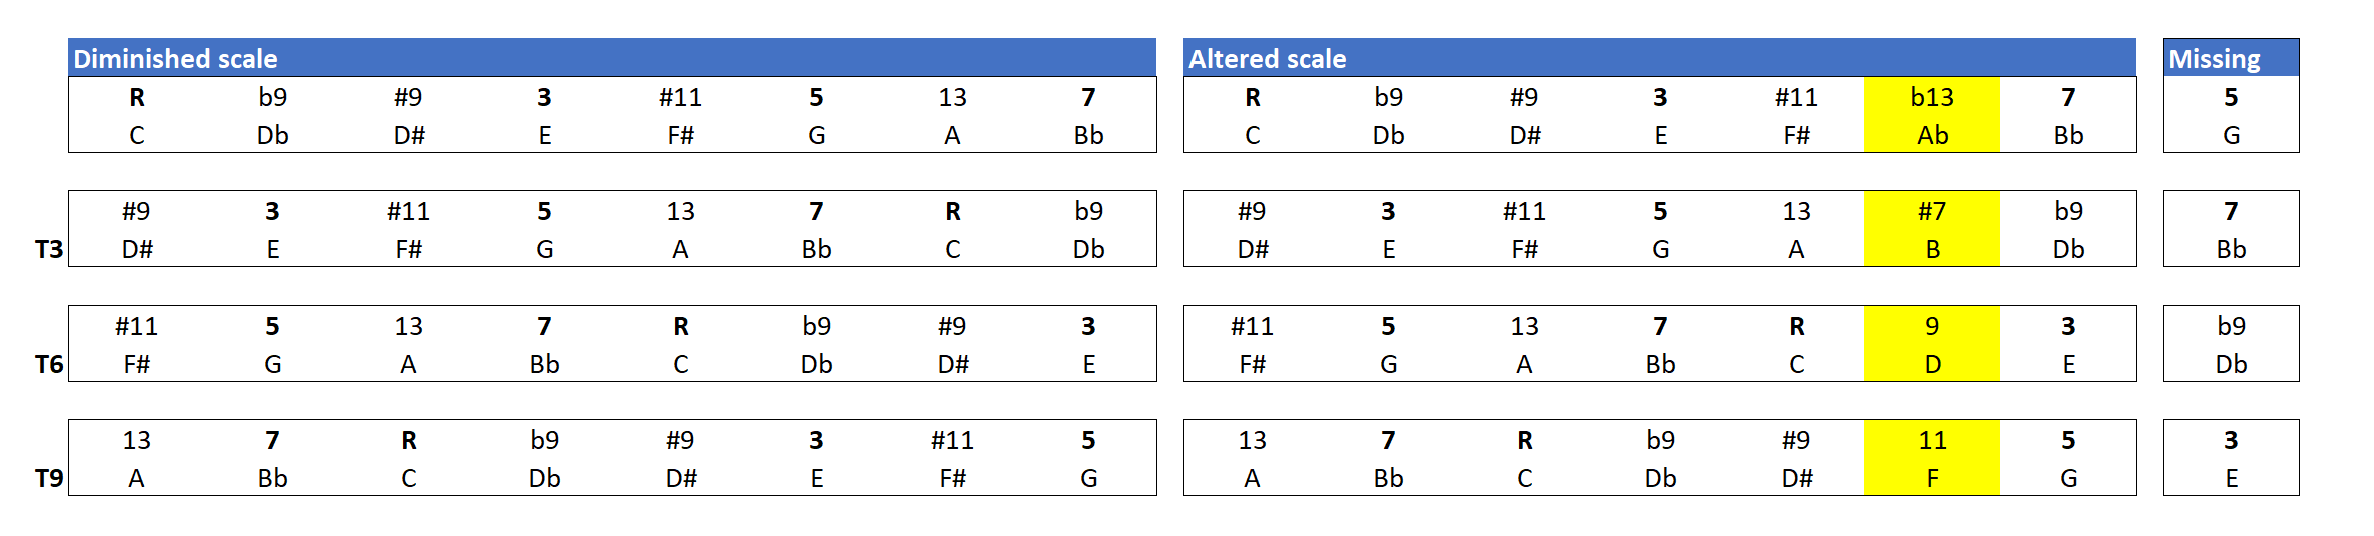 Comparison of the altered scale and the diminished scale, showing transpositions at the minor third.